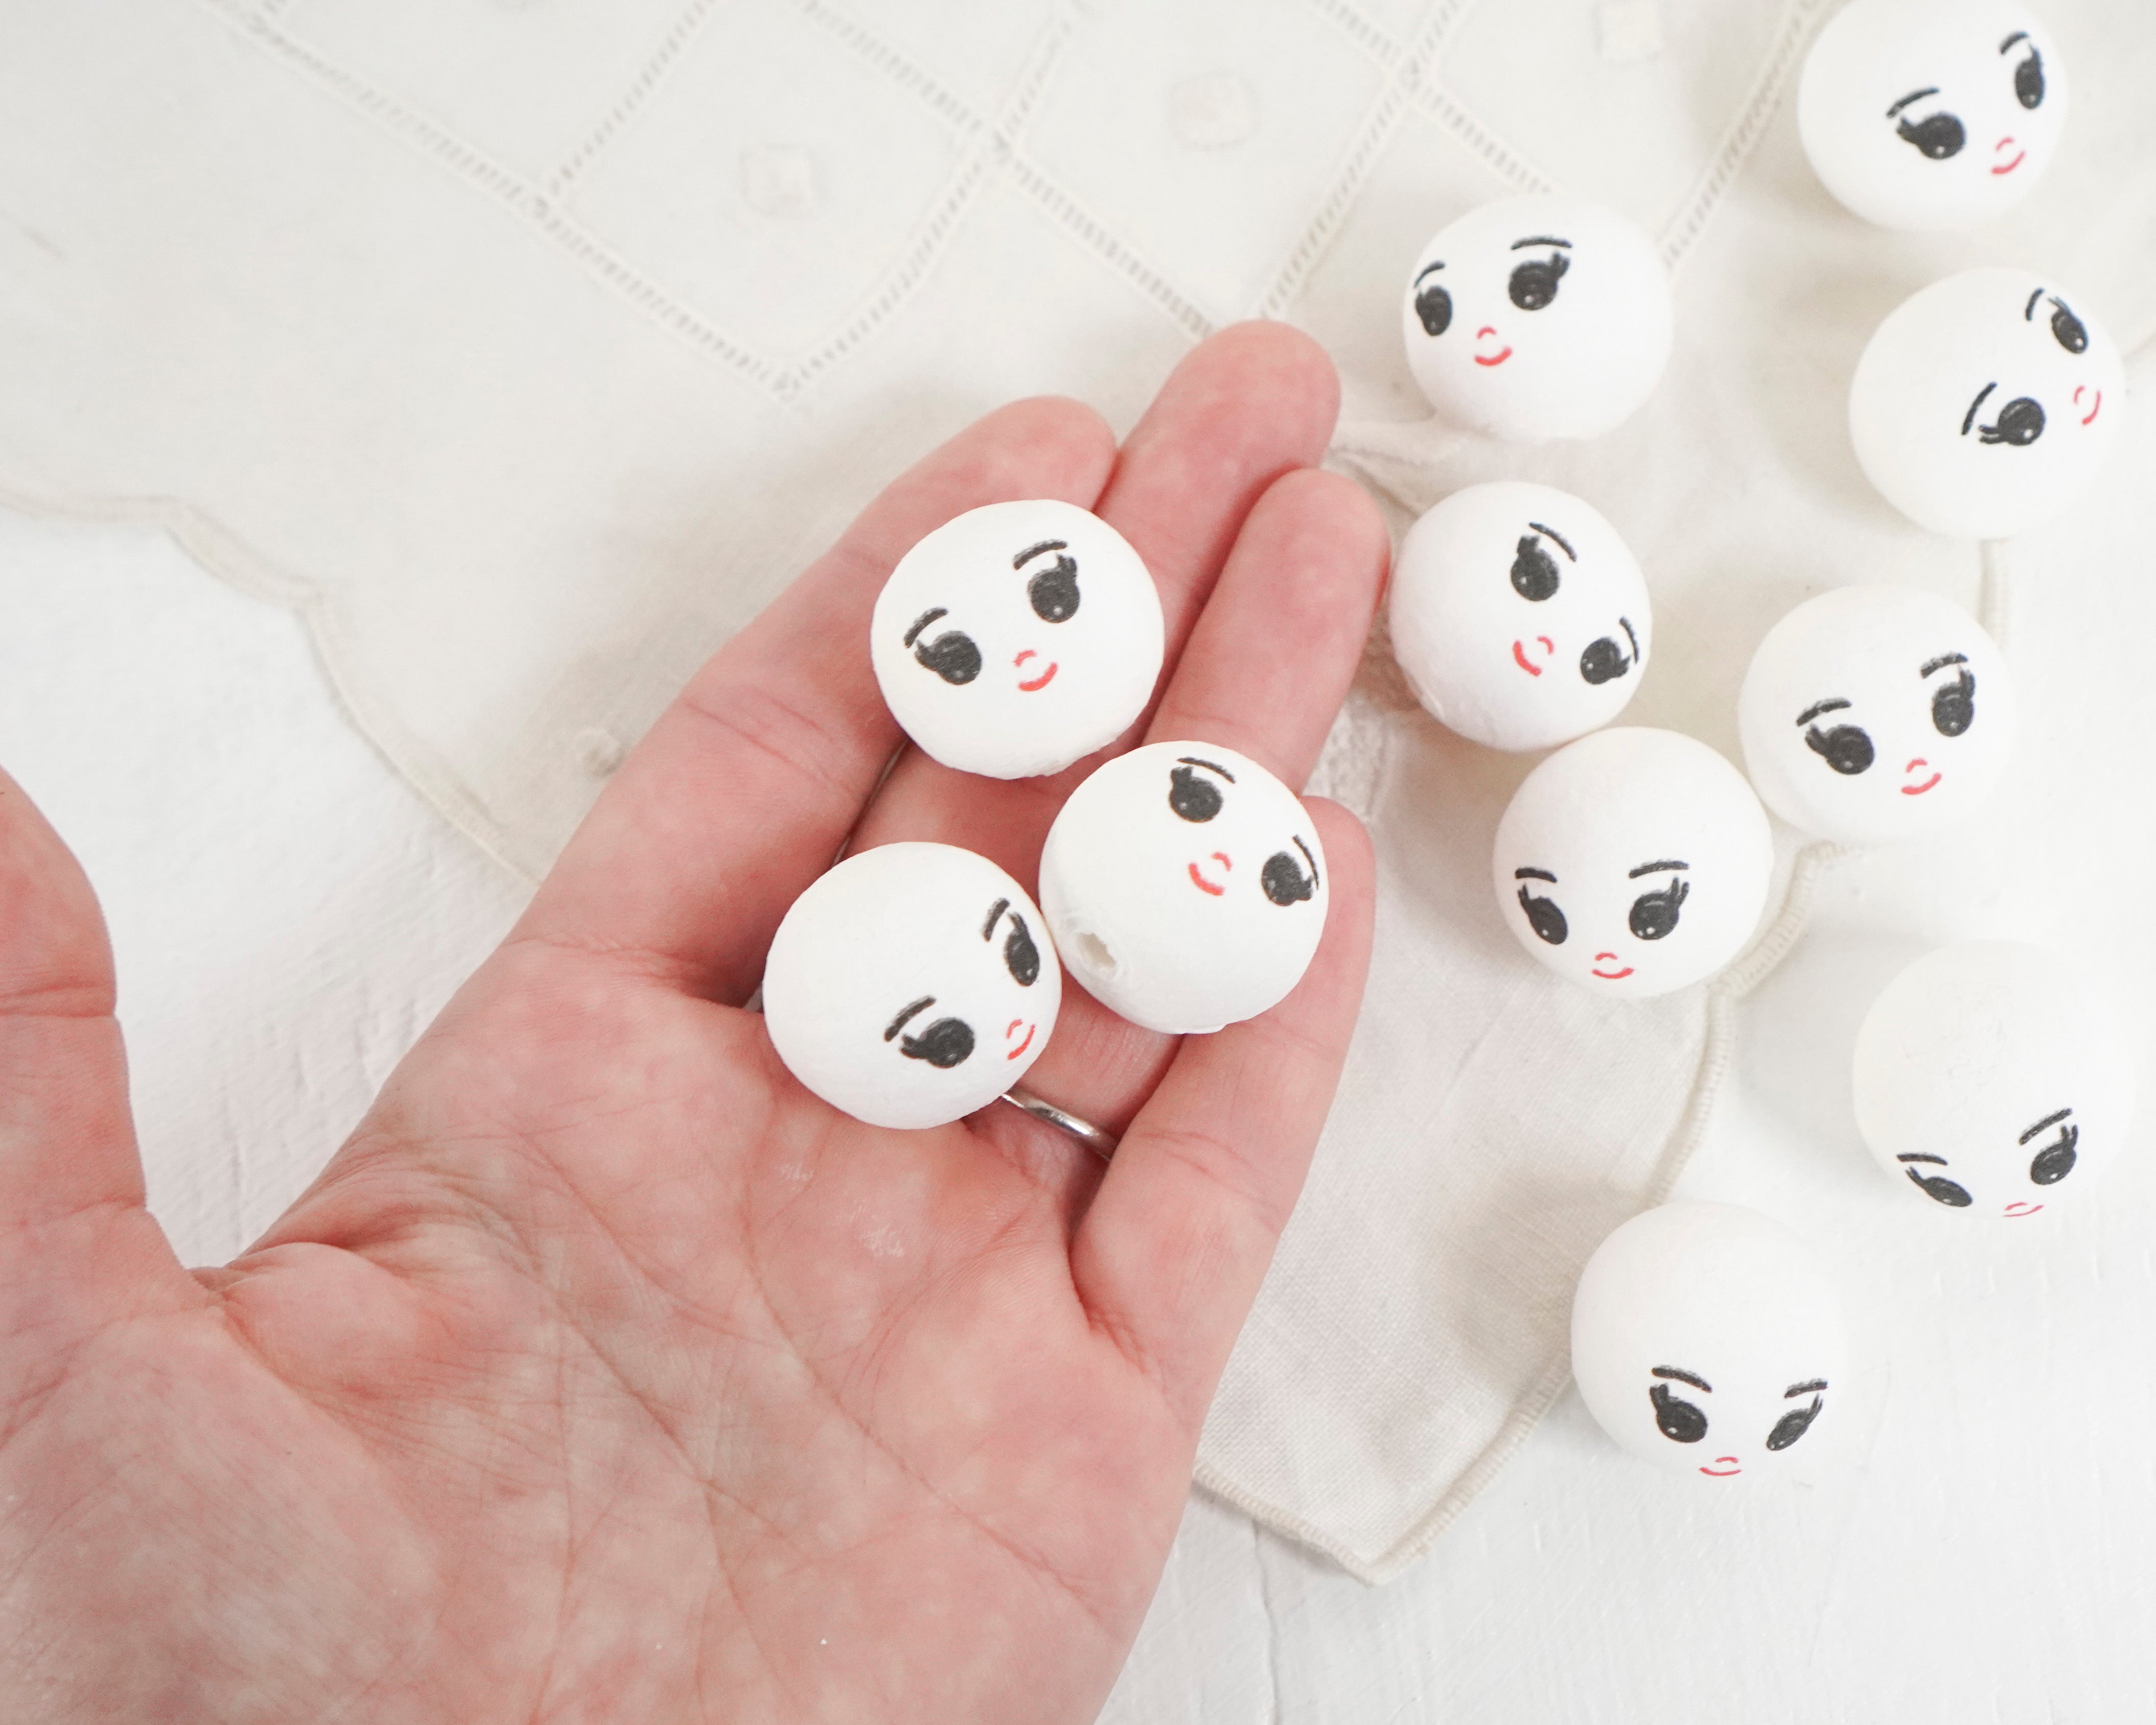 Spun Cotton Heads: DREAMER - 22mm White Doll Heads with Faces, 12 Pcs.